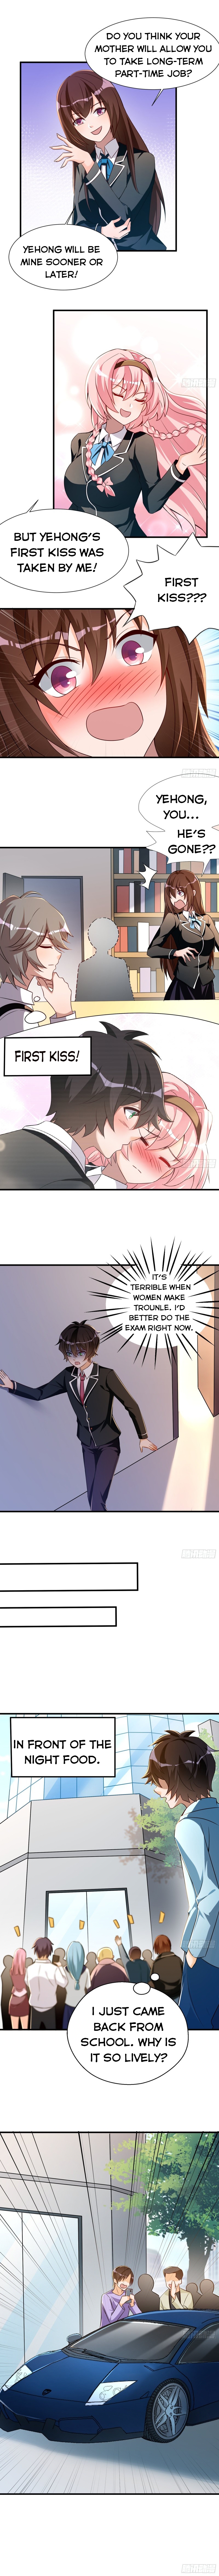 My Vision Becomes Stronger - Page 3